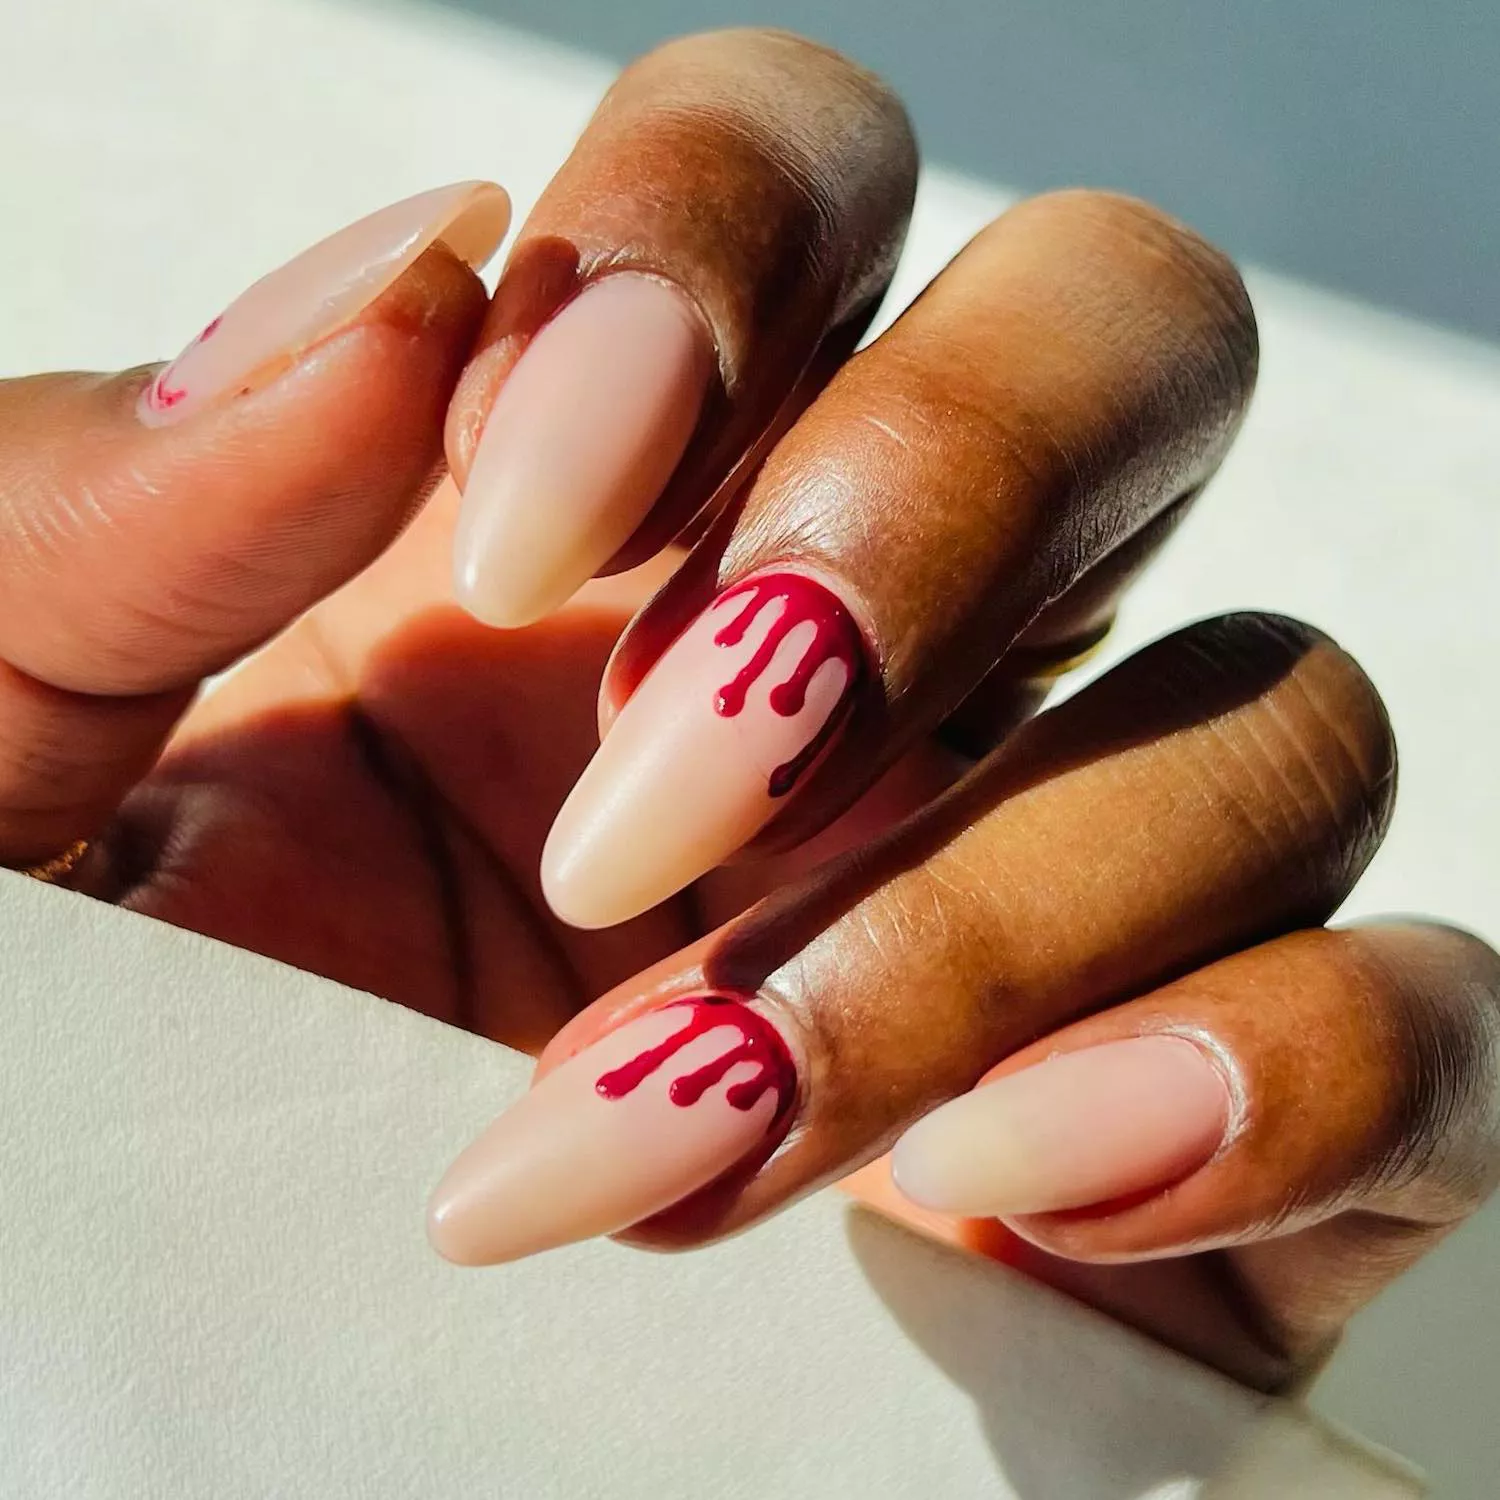 Manicure with translucent neutral base and blood tip cuticle accents